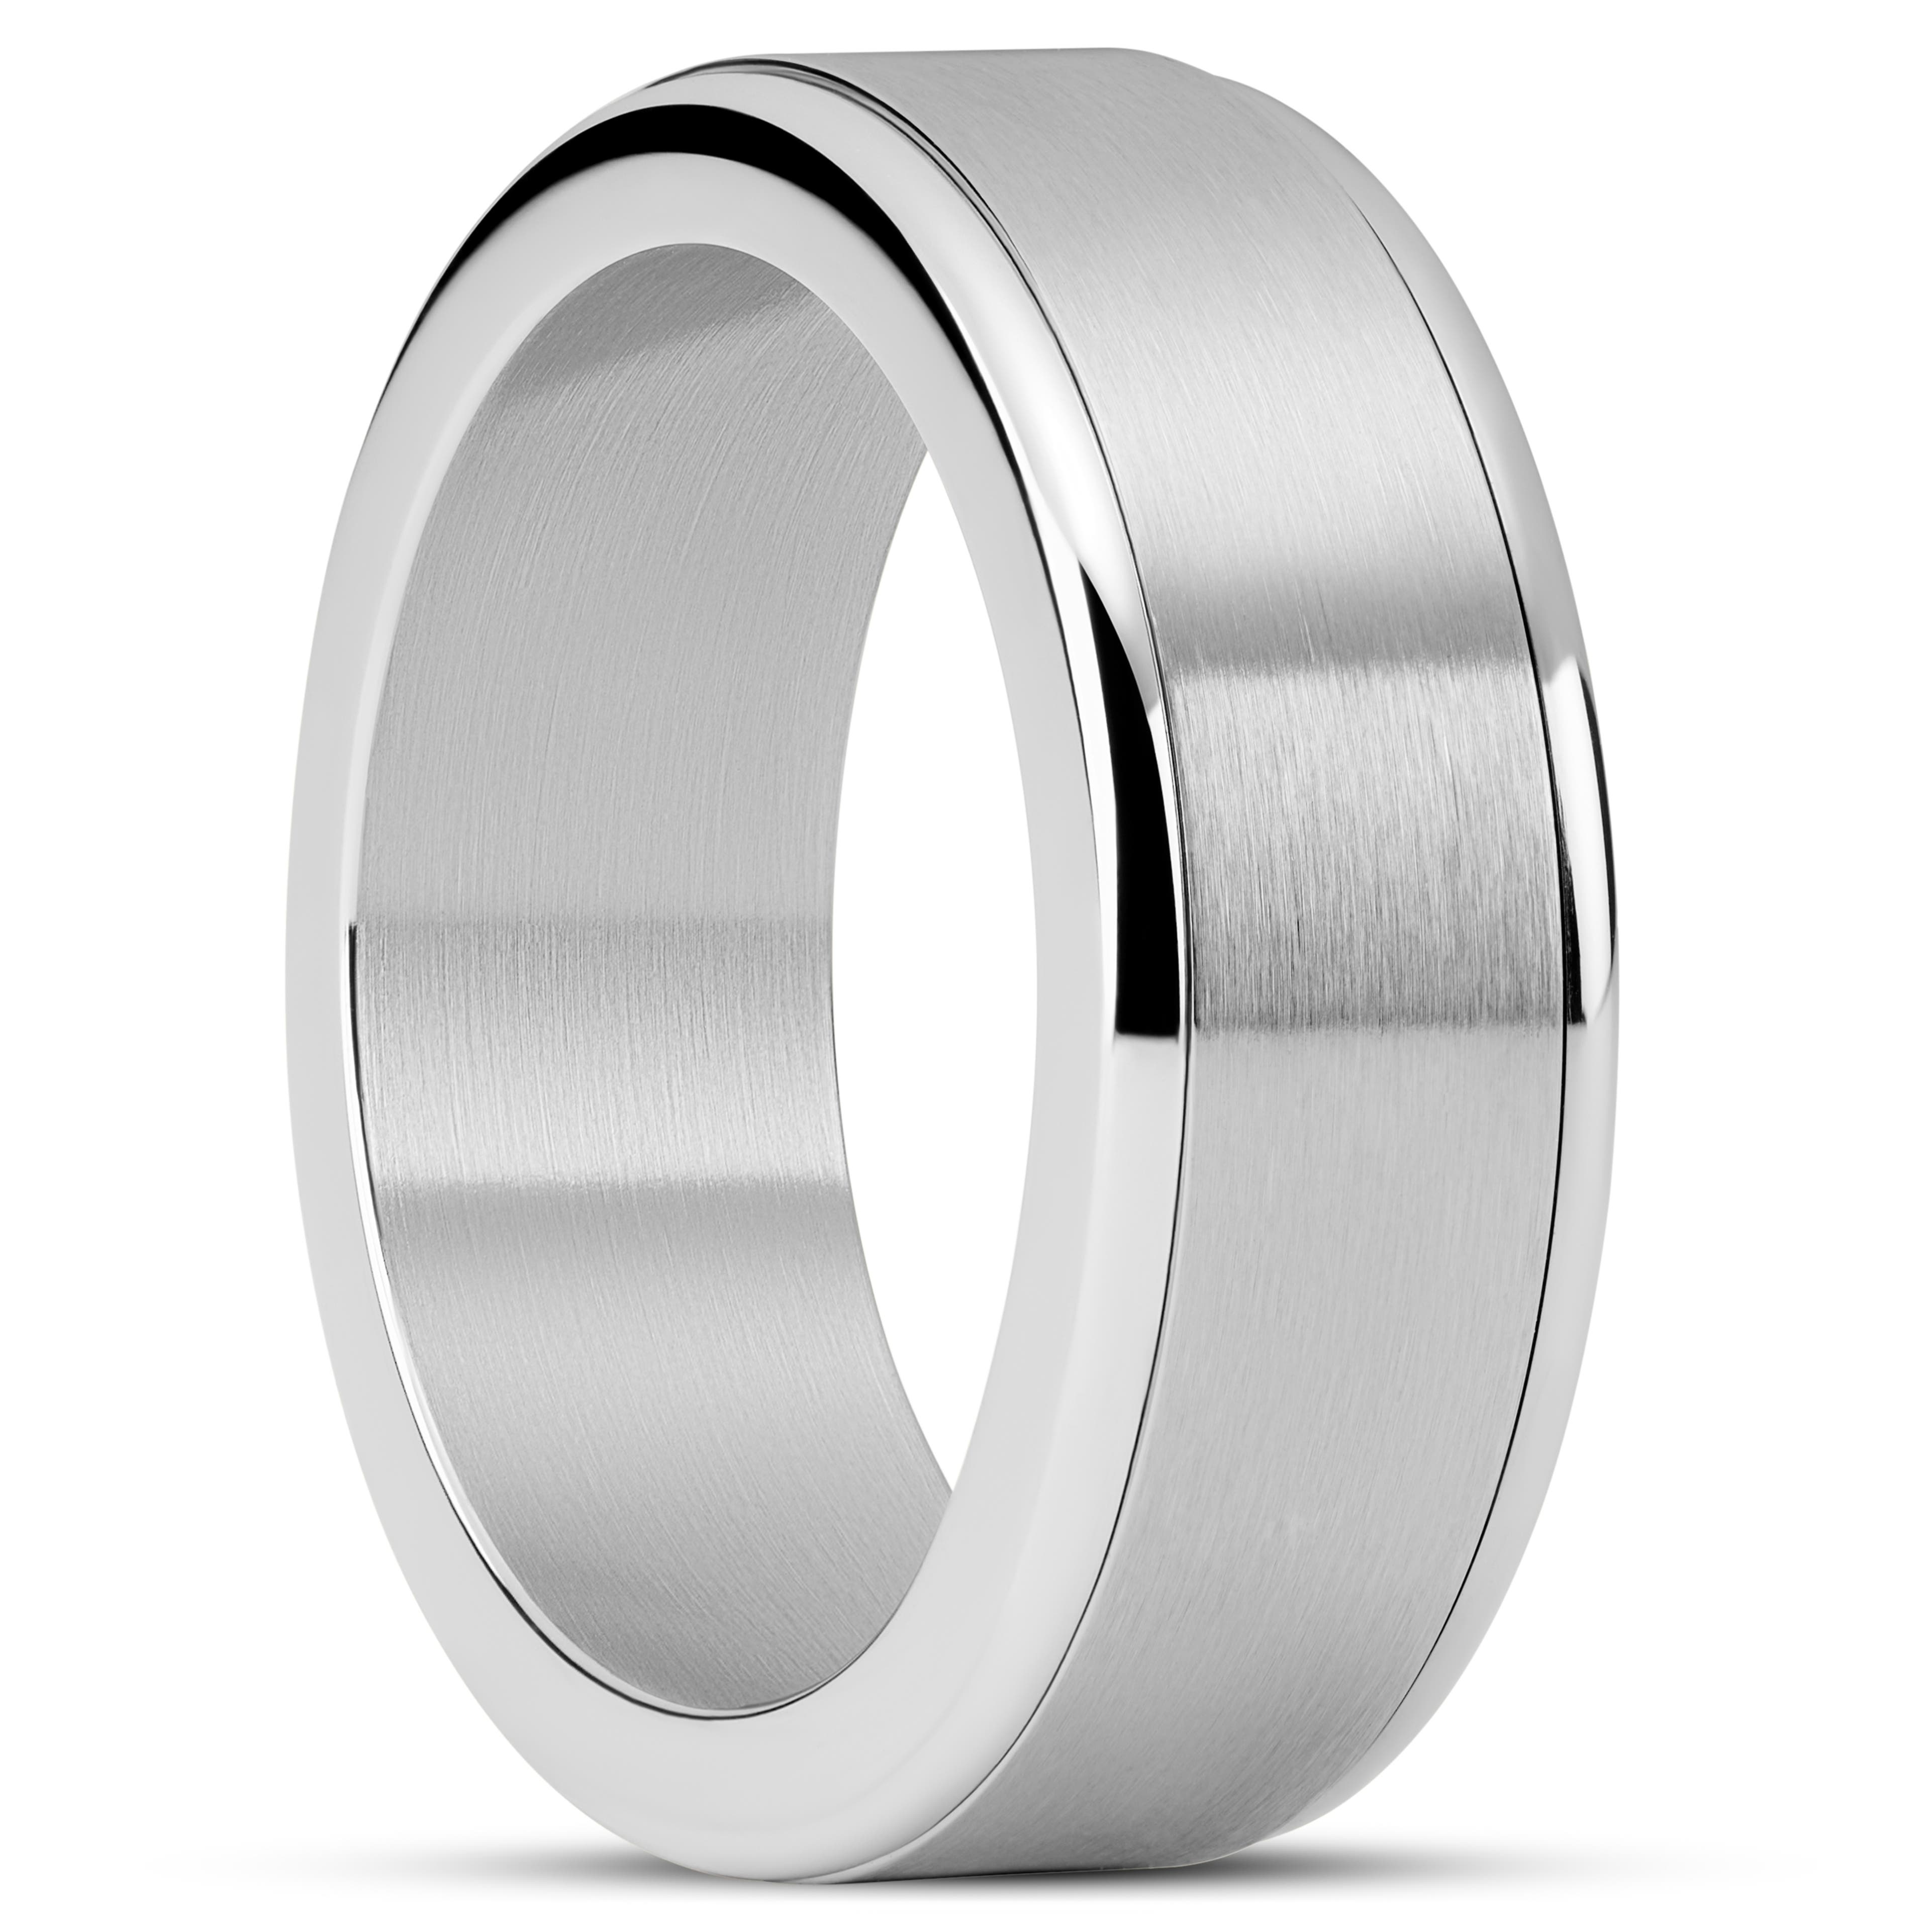 Enthumema |1/3" (8 mm) Brushed Silver-tone Stainless Steel Fidget Ring